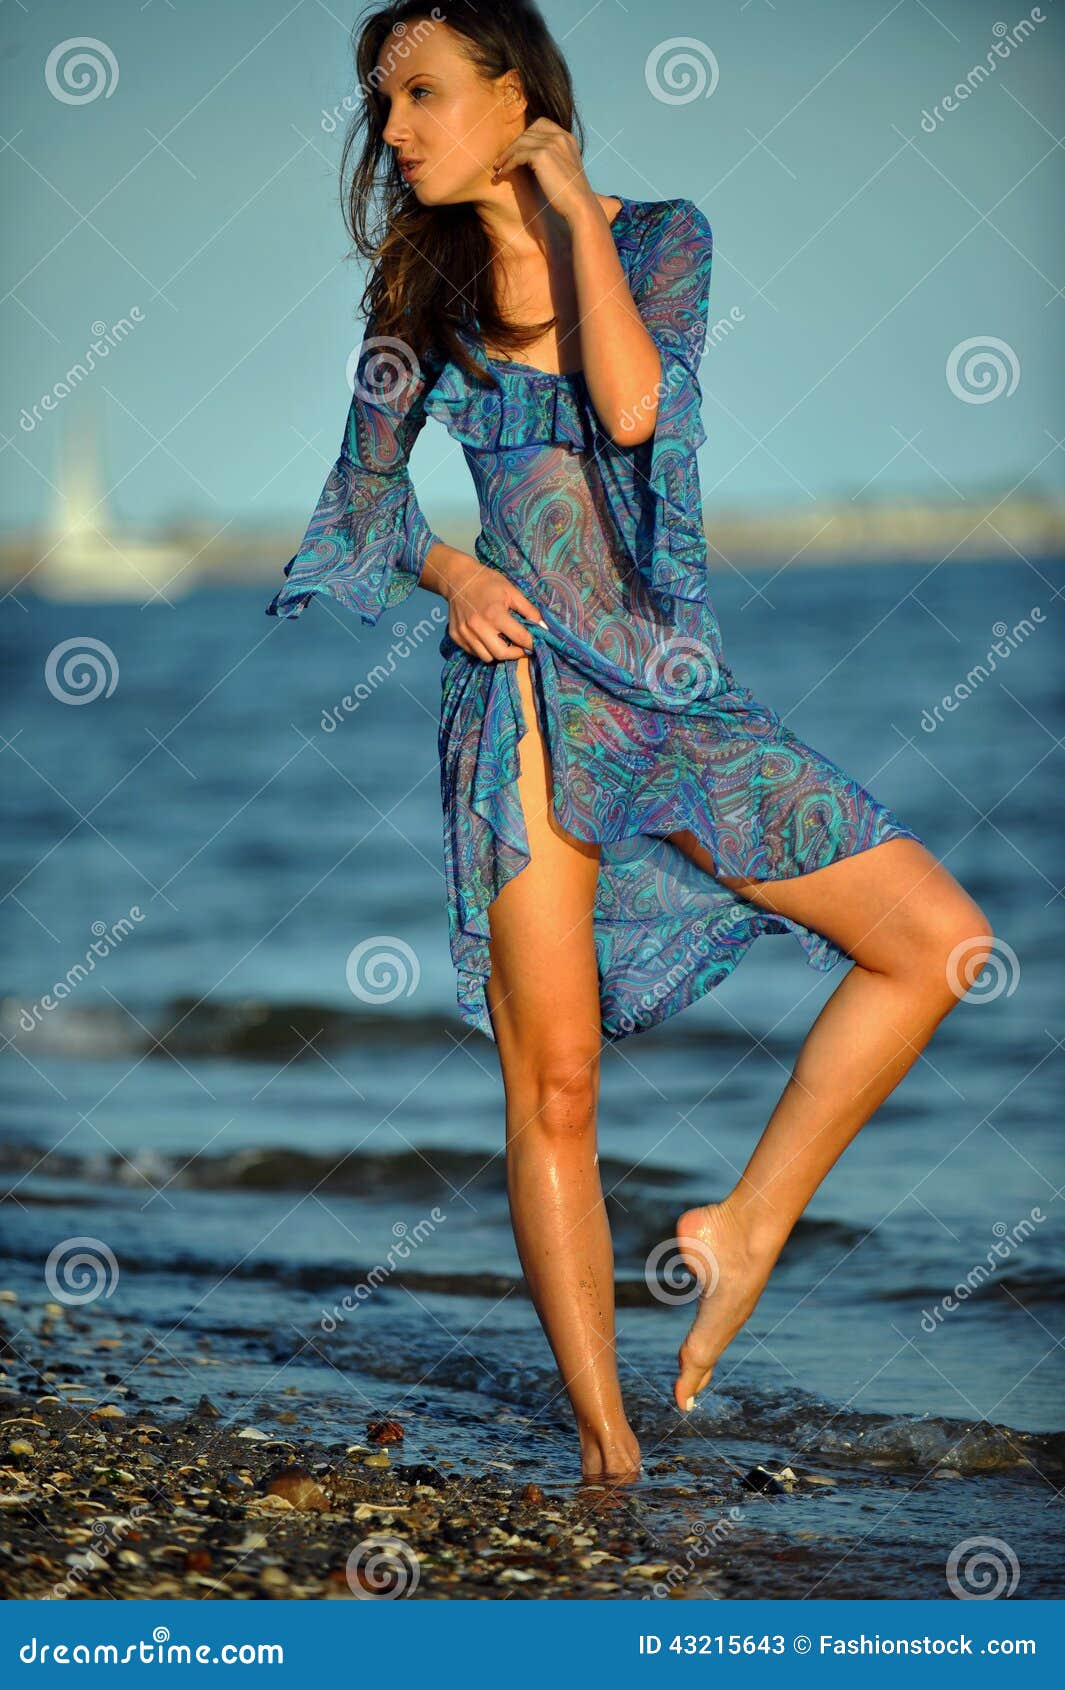 Alluring Woman Posing On The Beach In Floral Transparent Dress Stock Photo Image